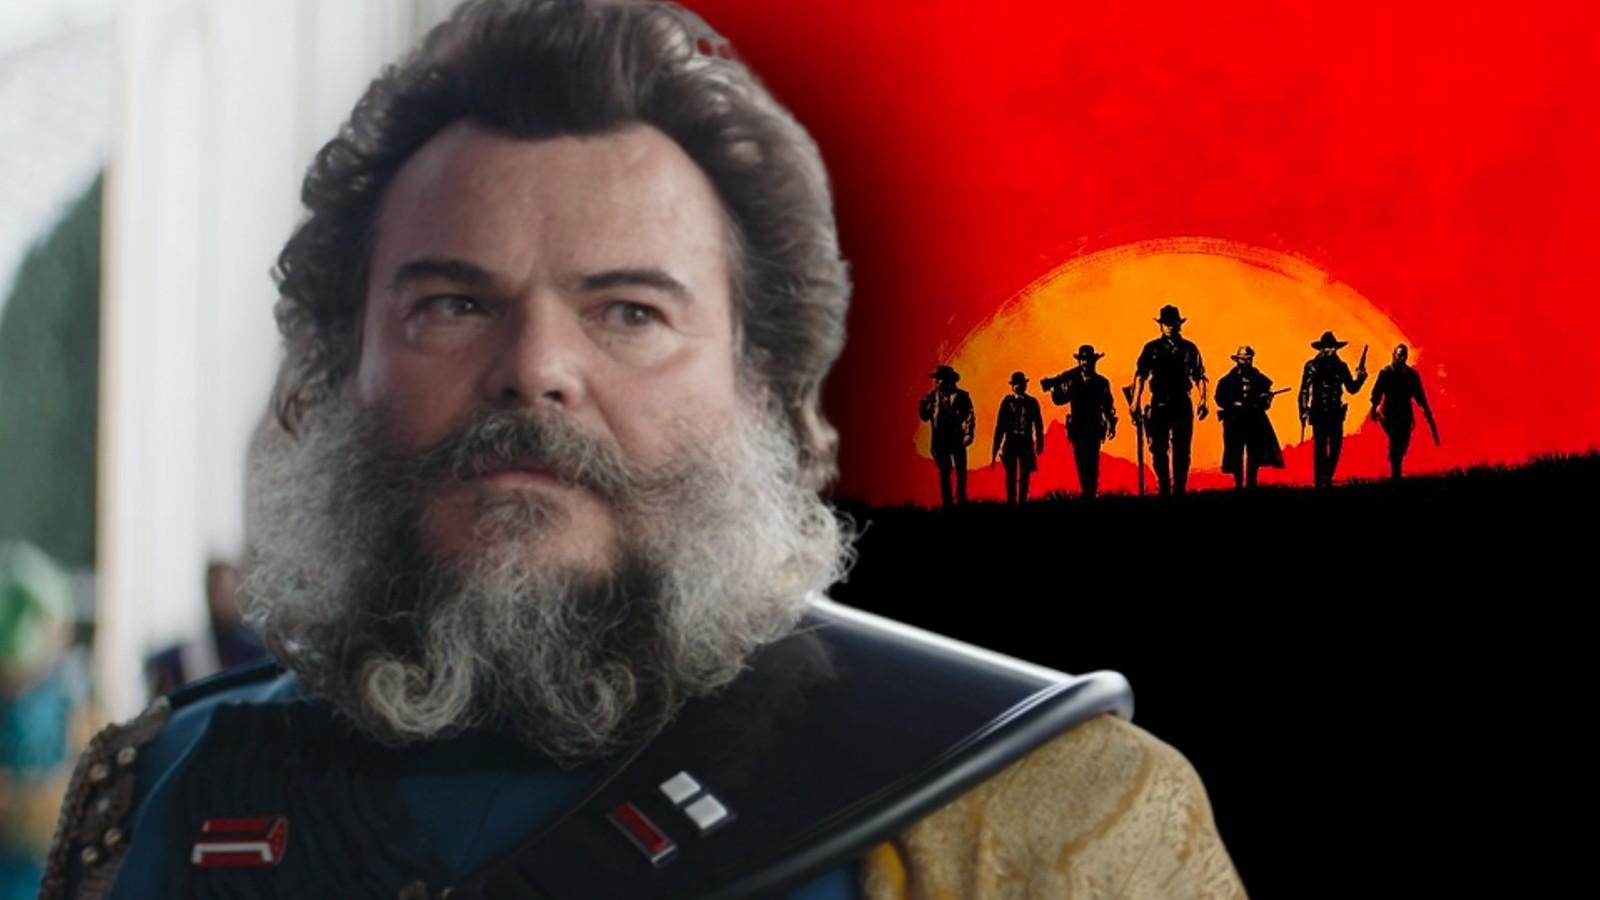 Jack Black in The Mandalorian and the poster for Red Dead Redemption 2